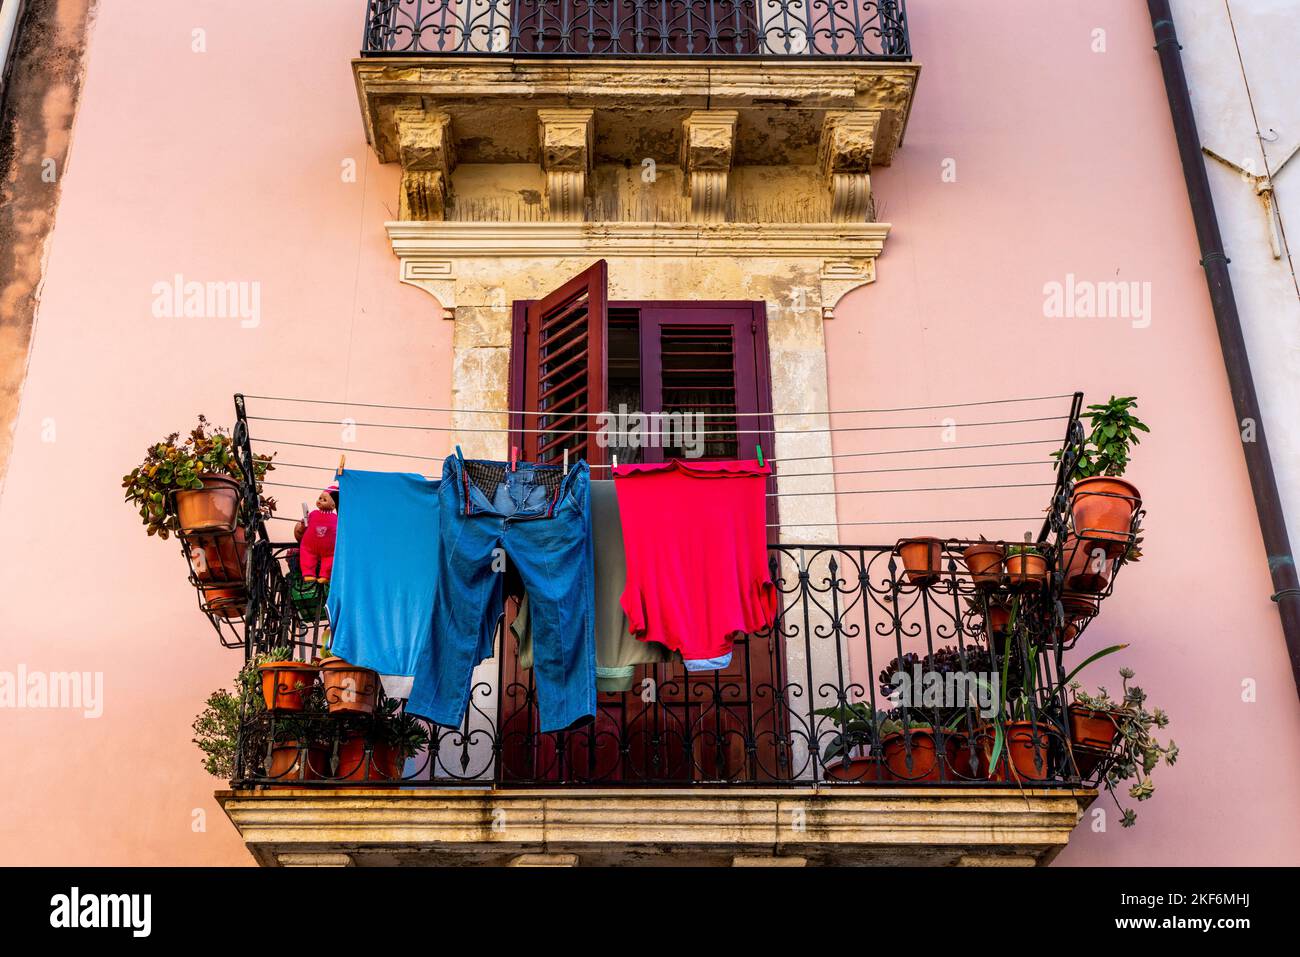 Clothes Hanging Out To Dry On A Balcony In Ortigia, Syracuse (Siracusa), Sicily, Italy Stock Photo